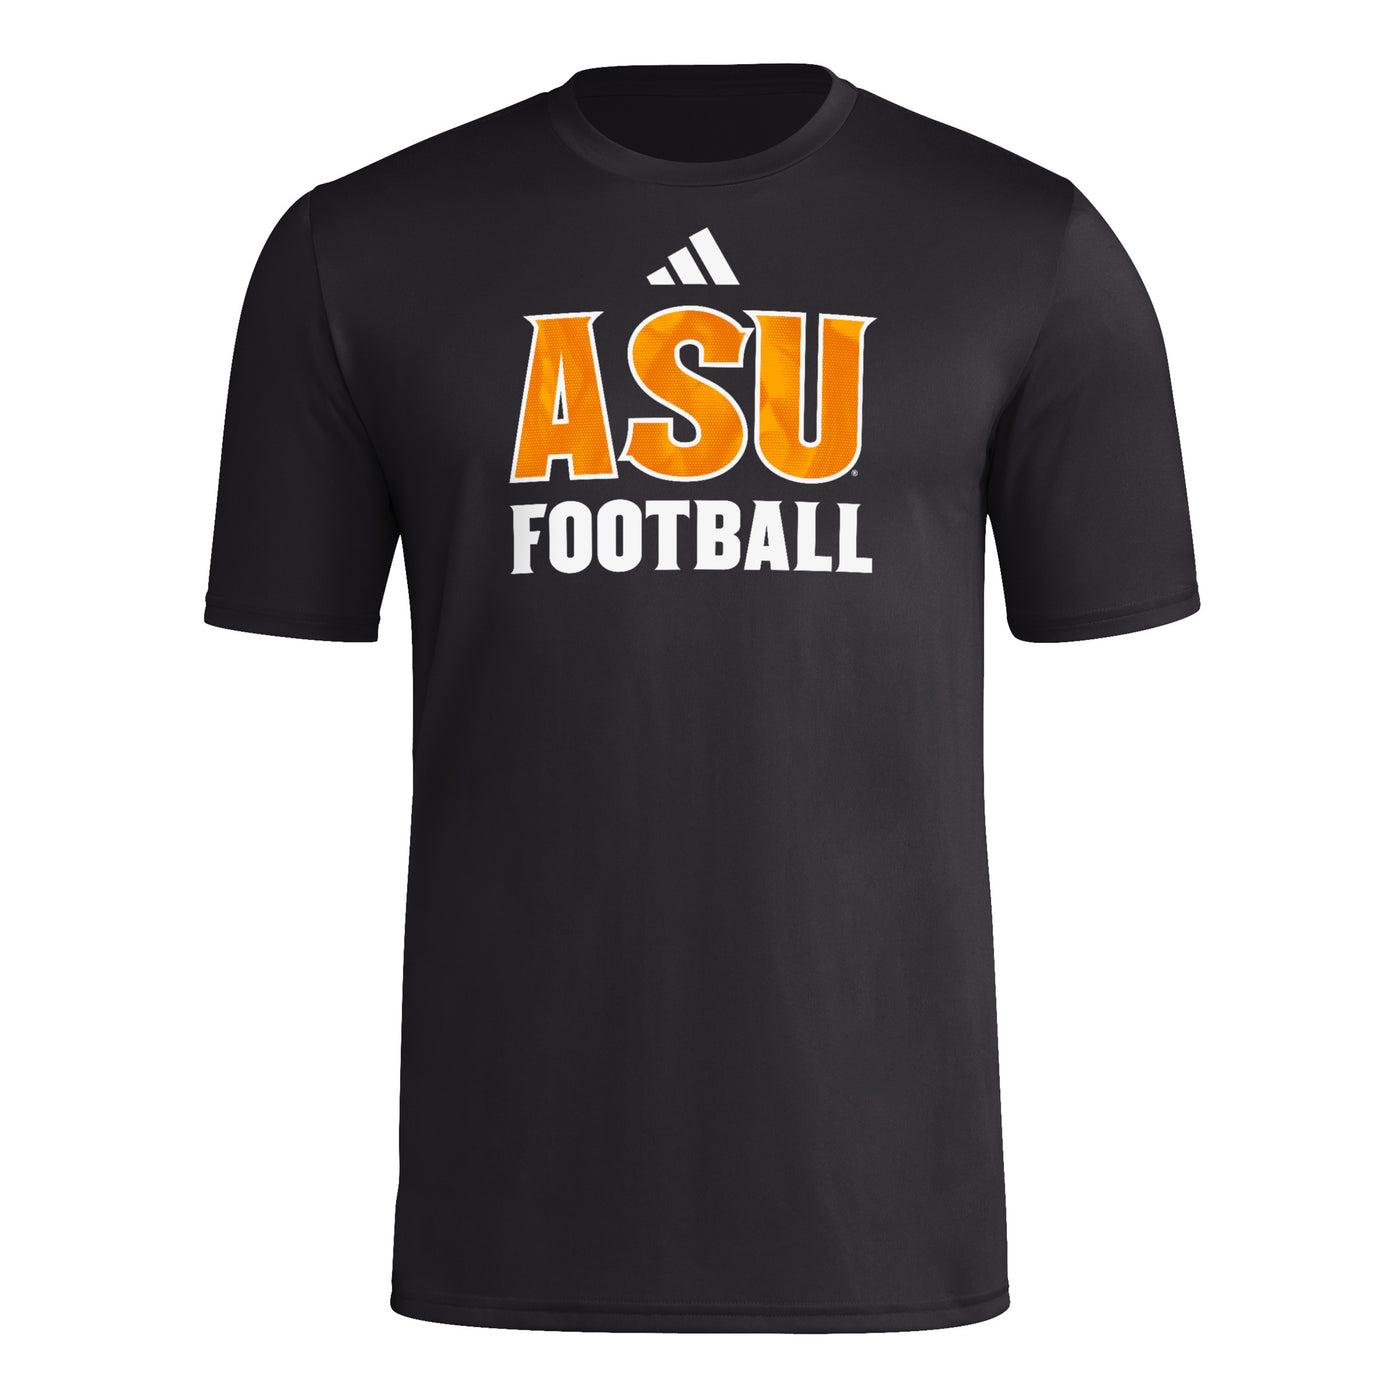 ASU youth Black T-shirt with the text 